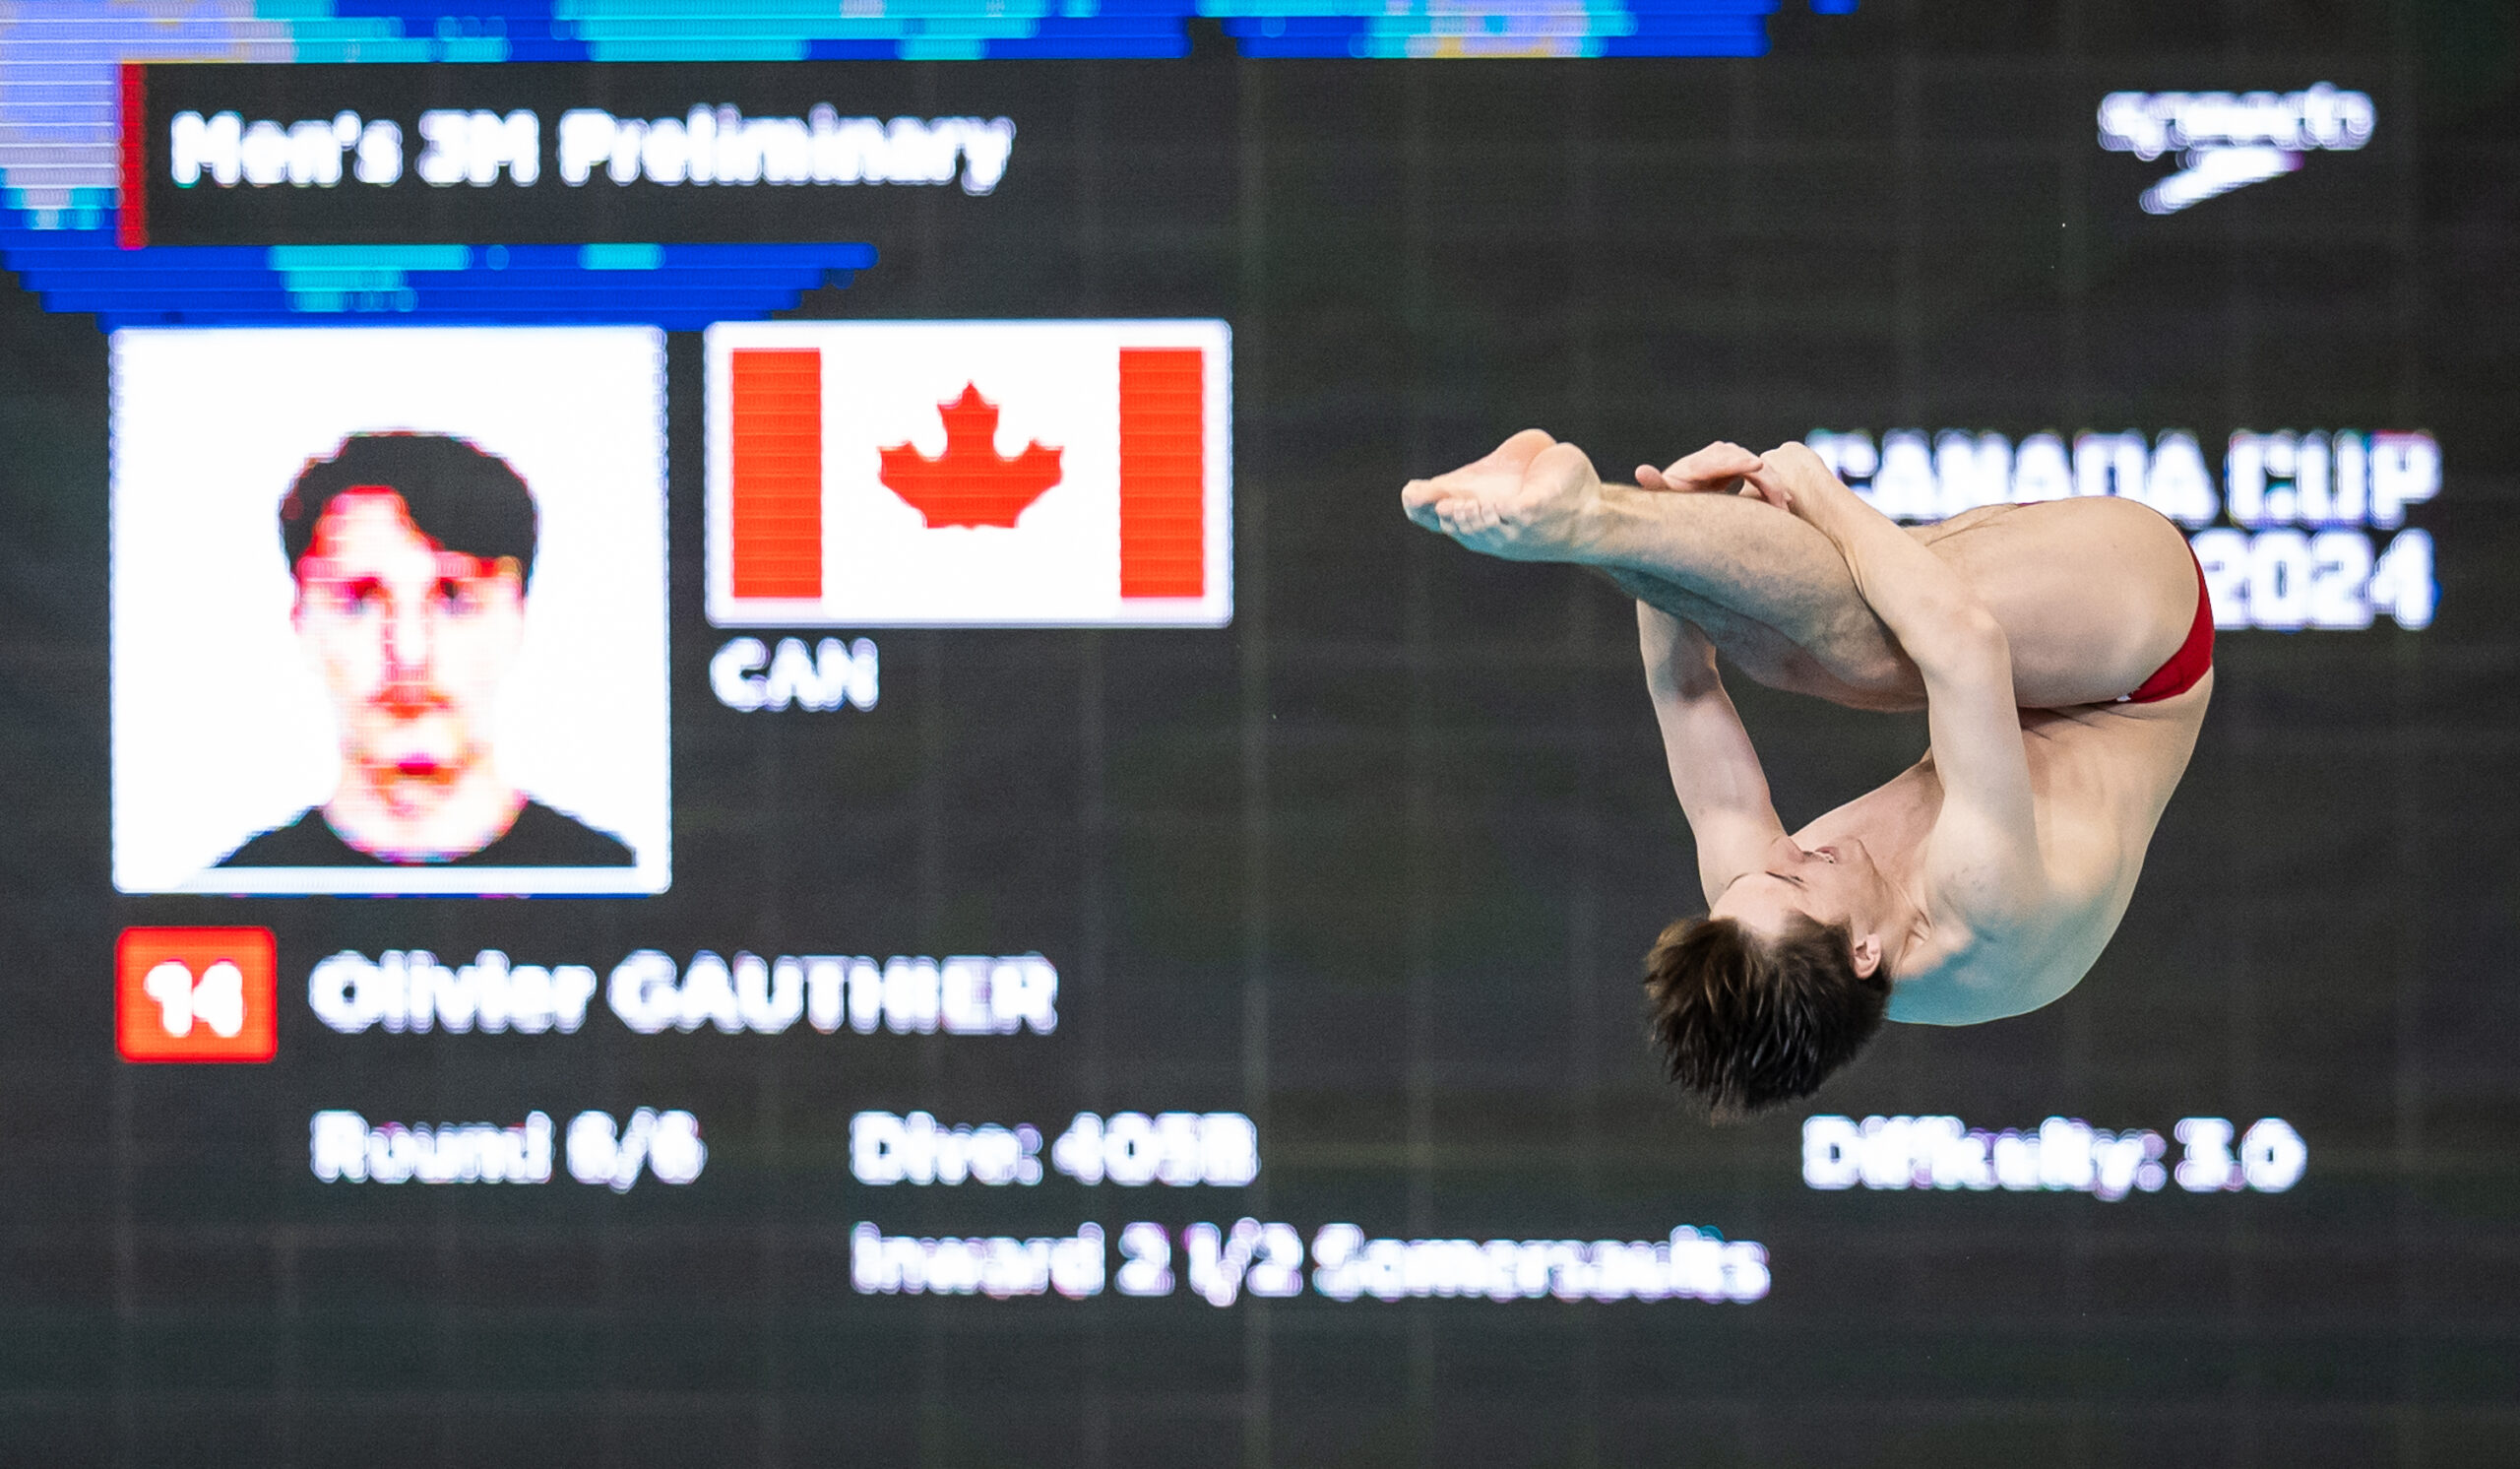 Eight Canadians Qualify for Finals in Calgary